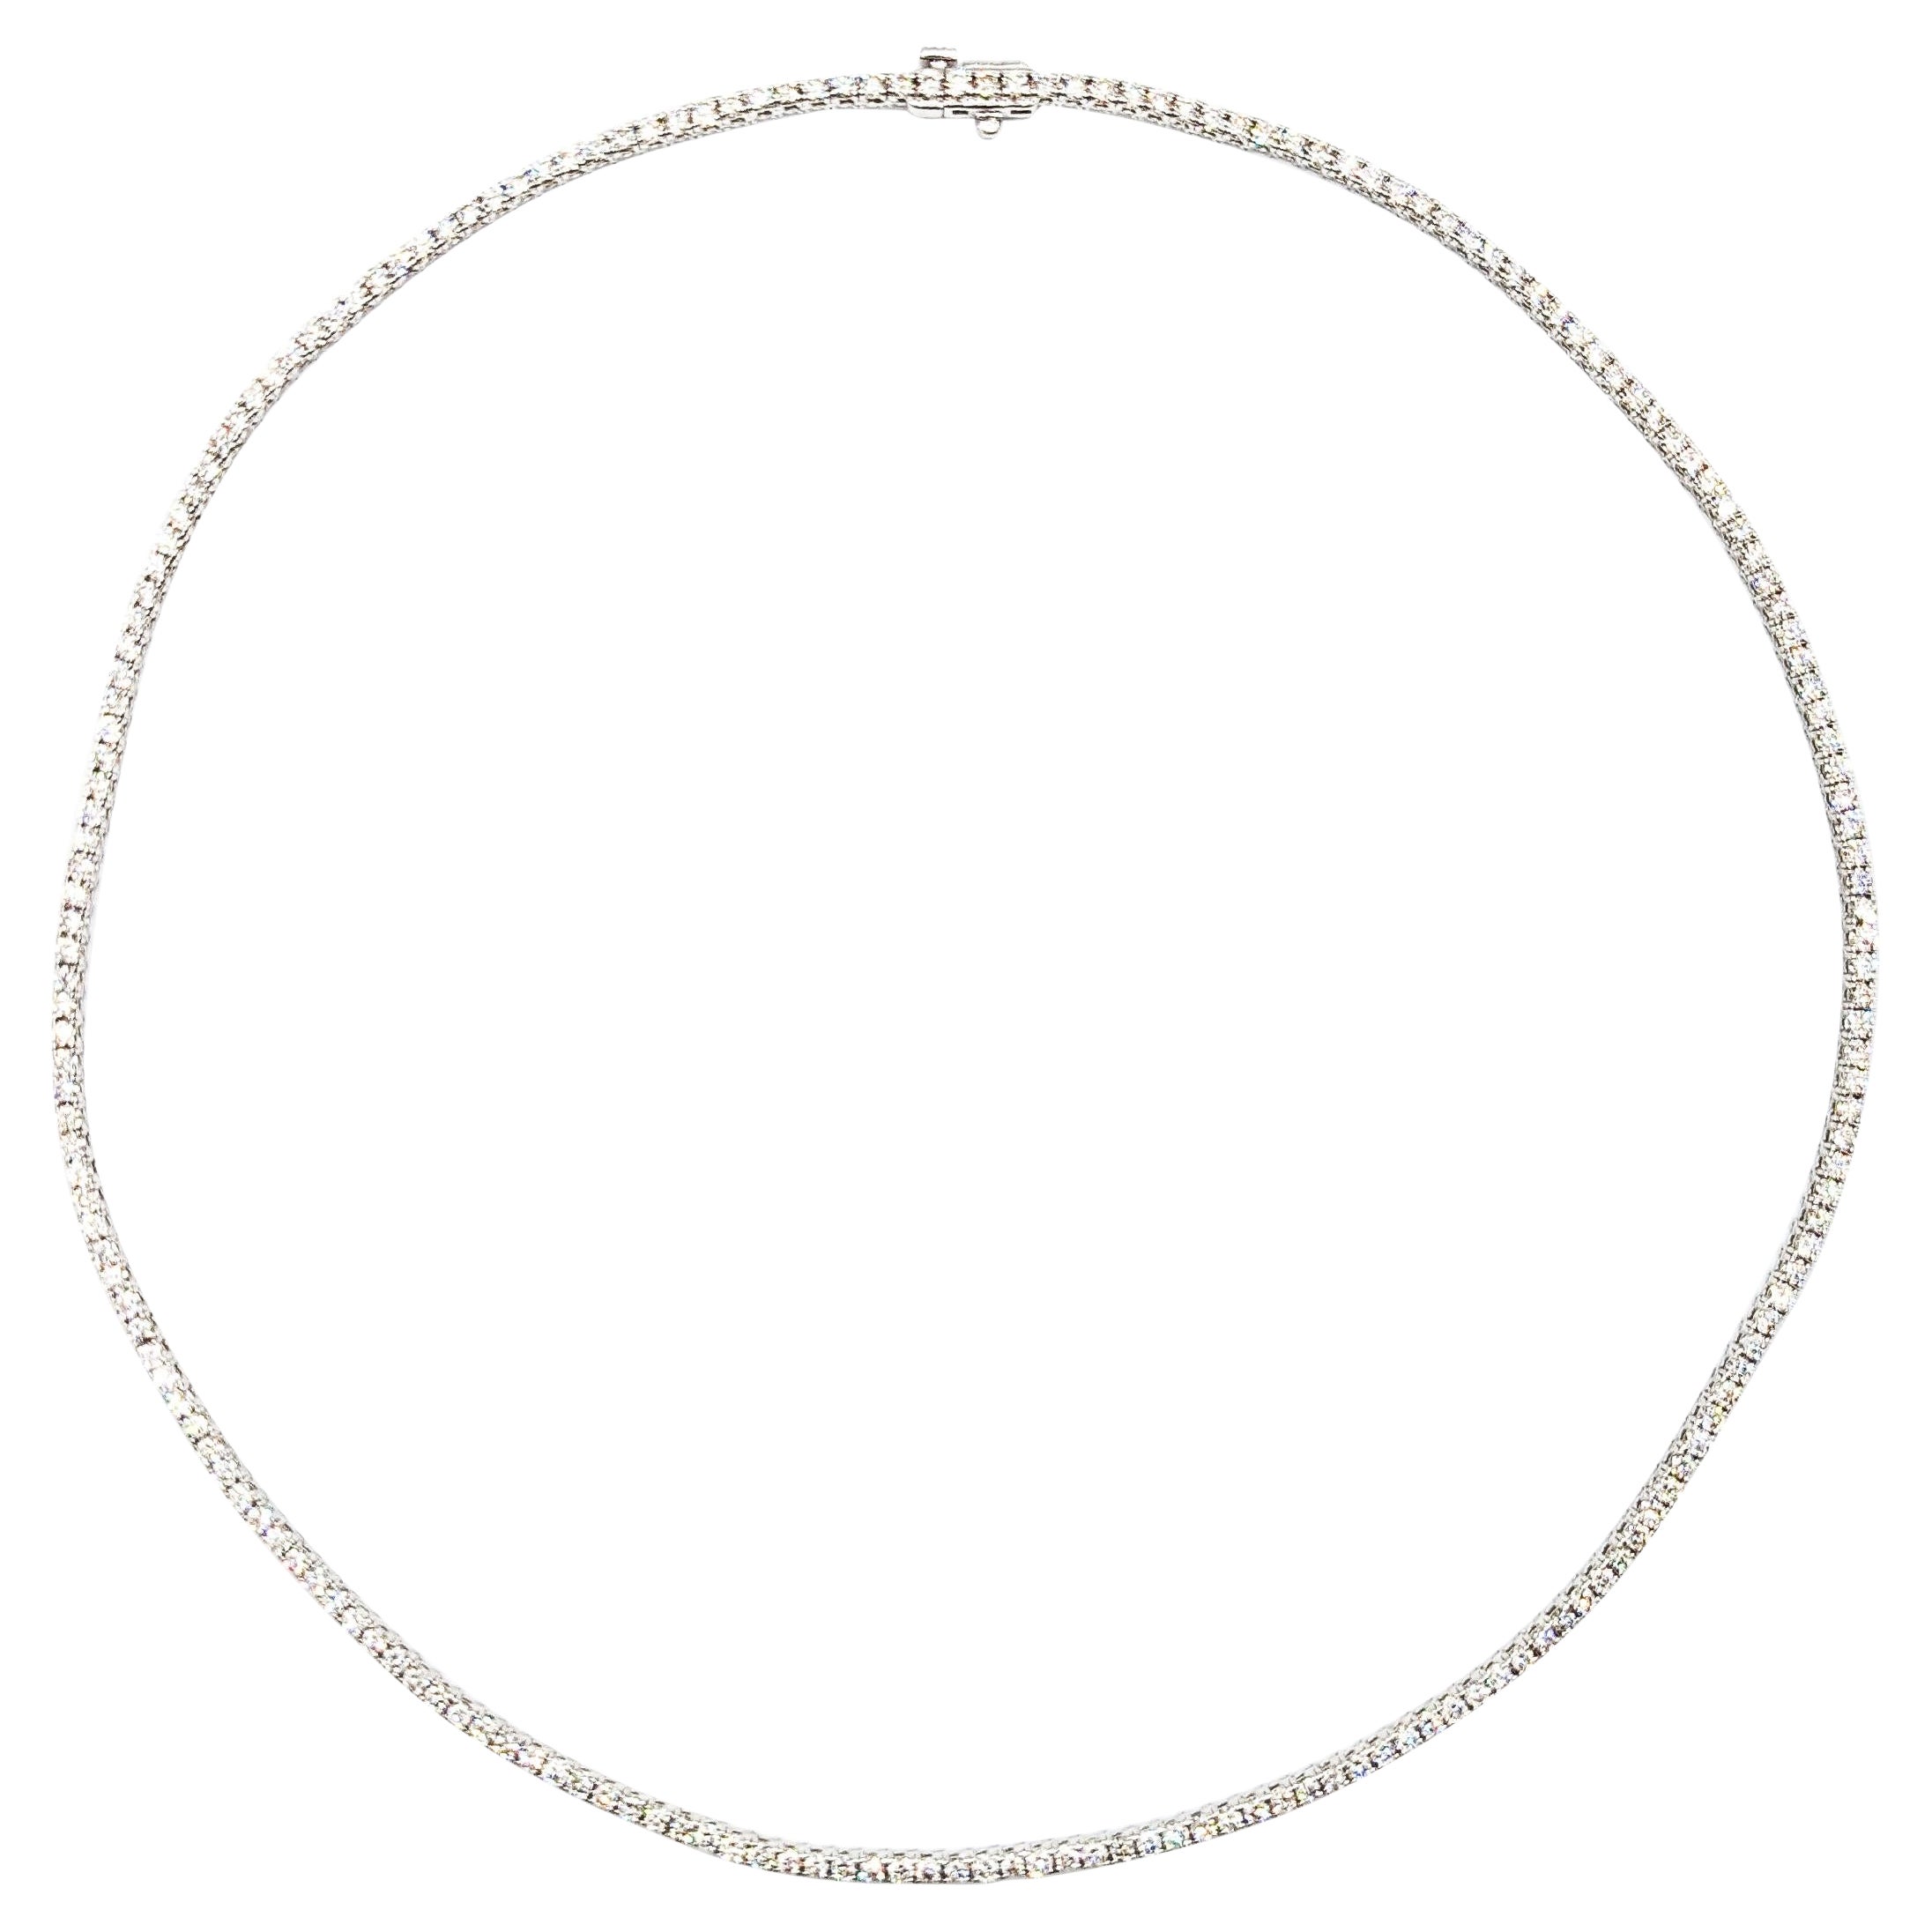 8ctw Diamond Tennis Necklace in White Gold For Sale